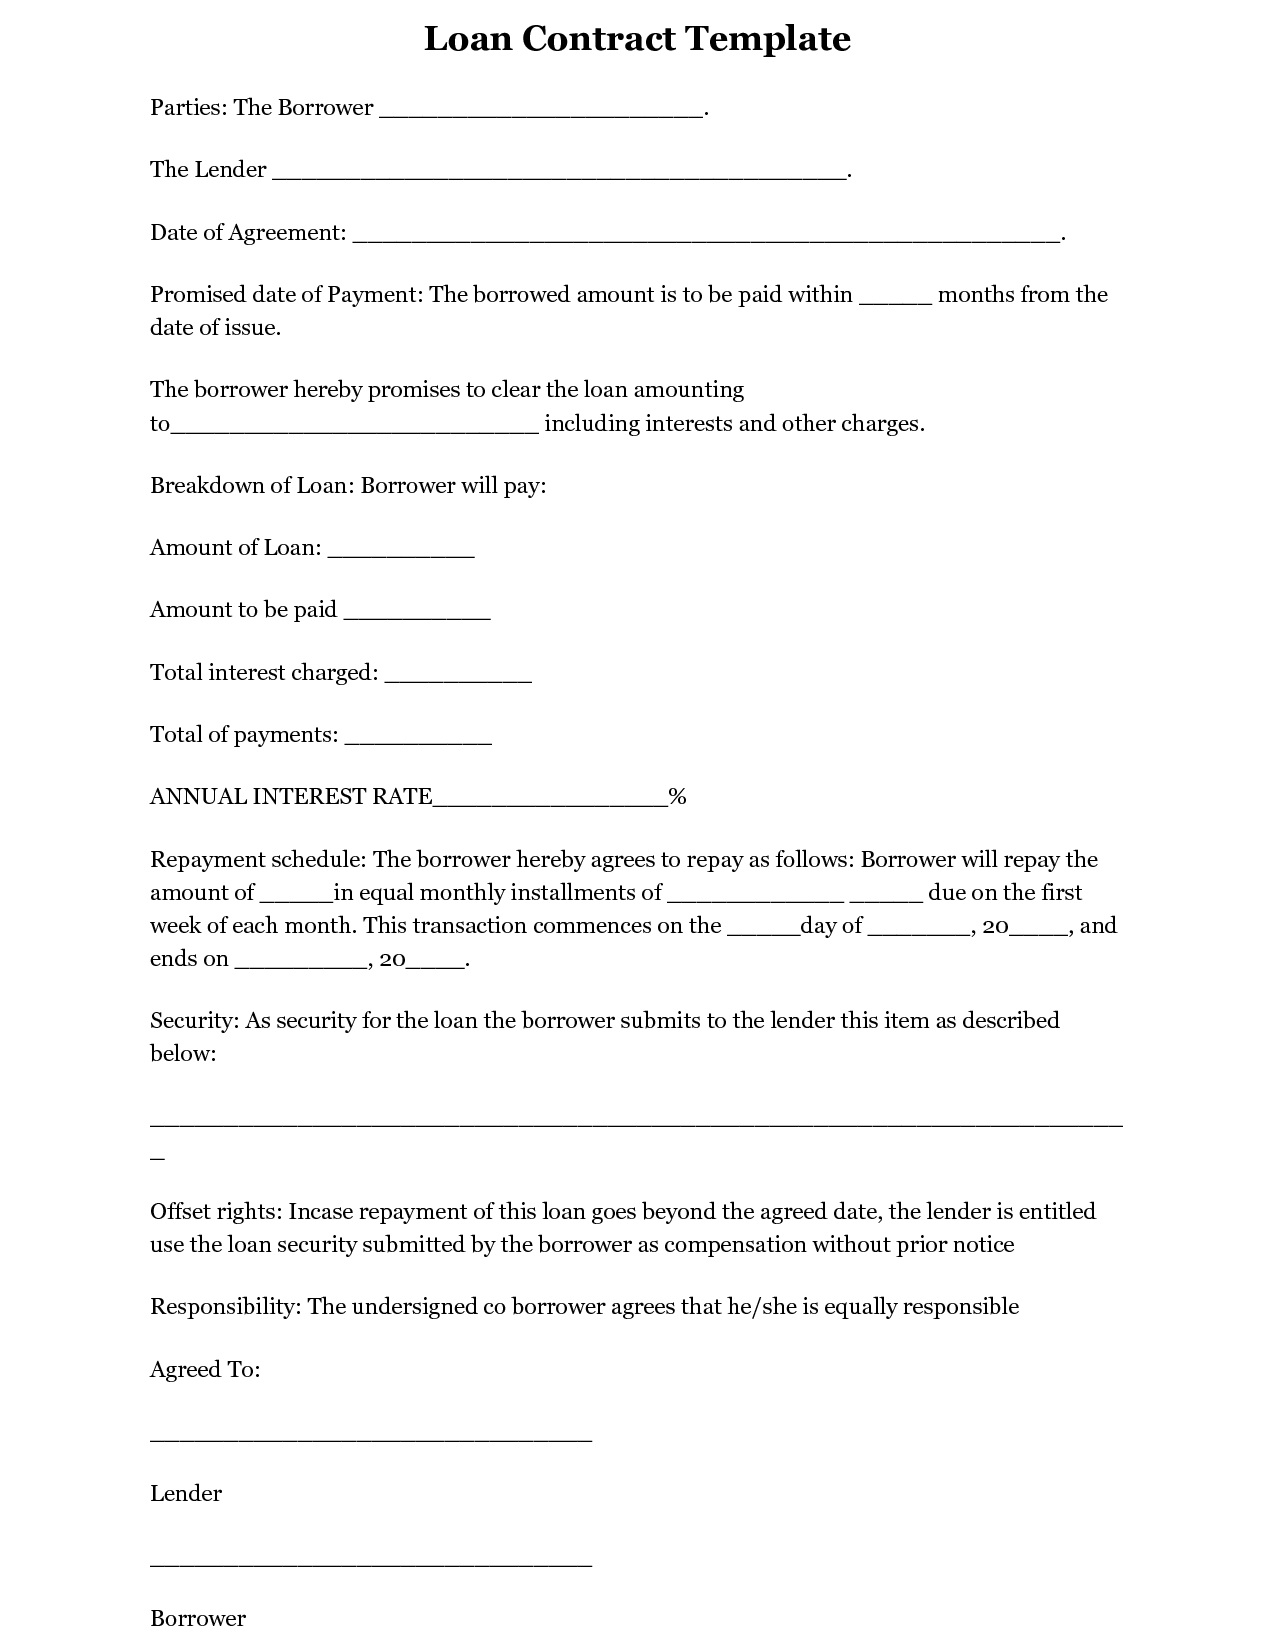 Terrific Blank Loan Contract Or Agreement Template Sample For Blank Loan Agreement Template